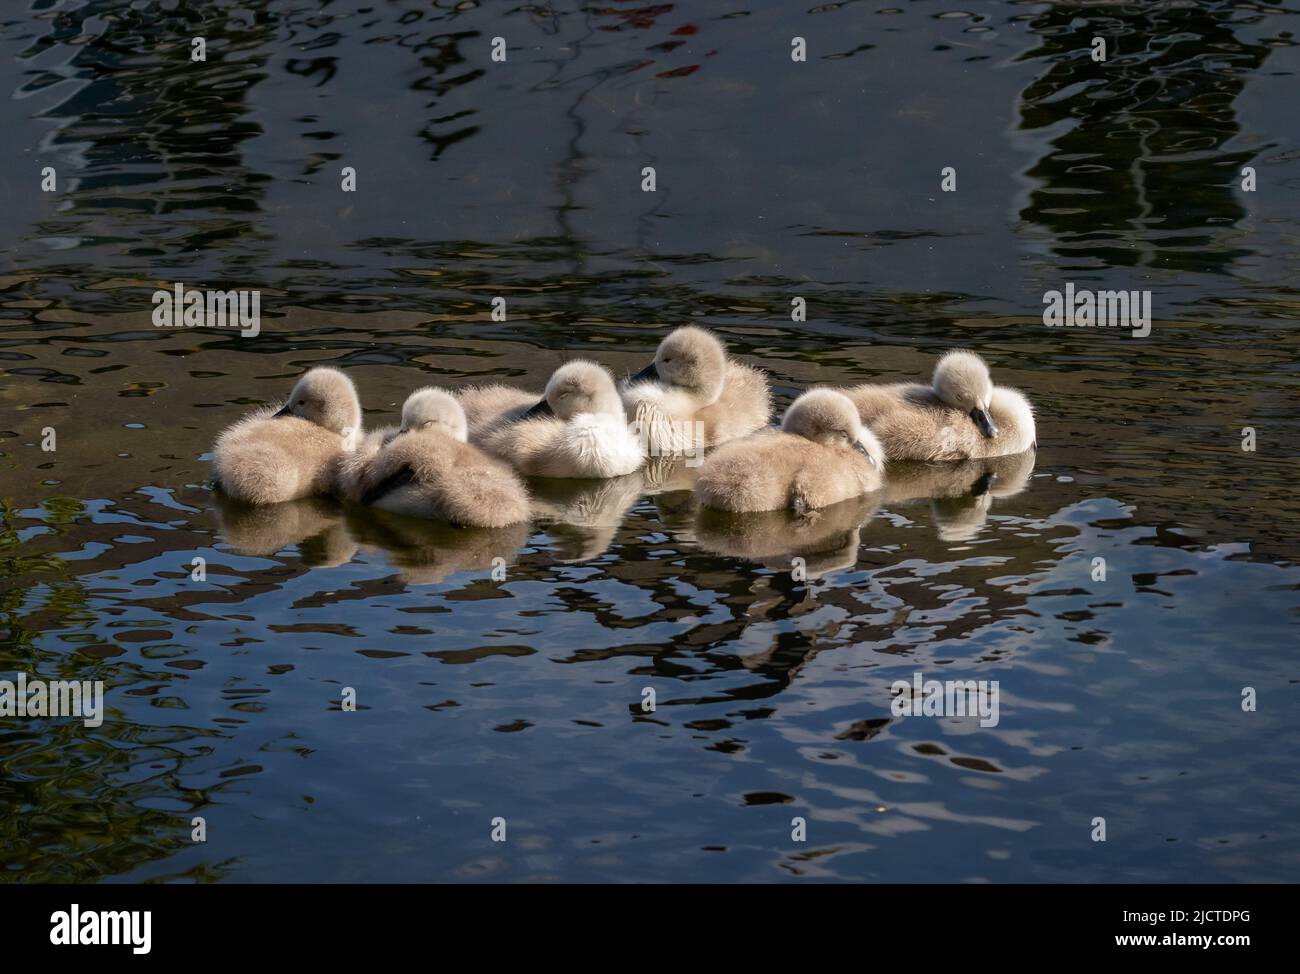 Six swan cygnets sleeping while floating on water. Newly hatched chicks with soft fluffy feathers asleep. 'Cygnus olor', Grand Canal, Dublin, Ireland Stock Photo